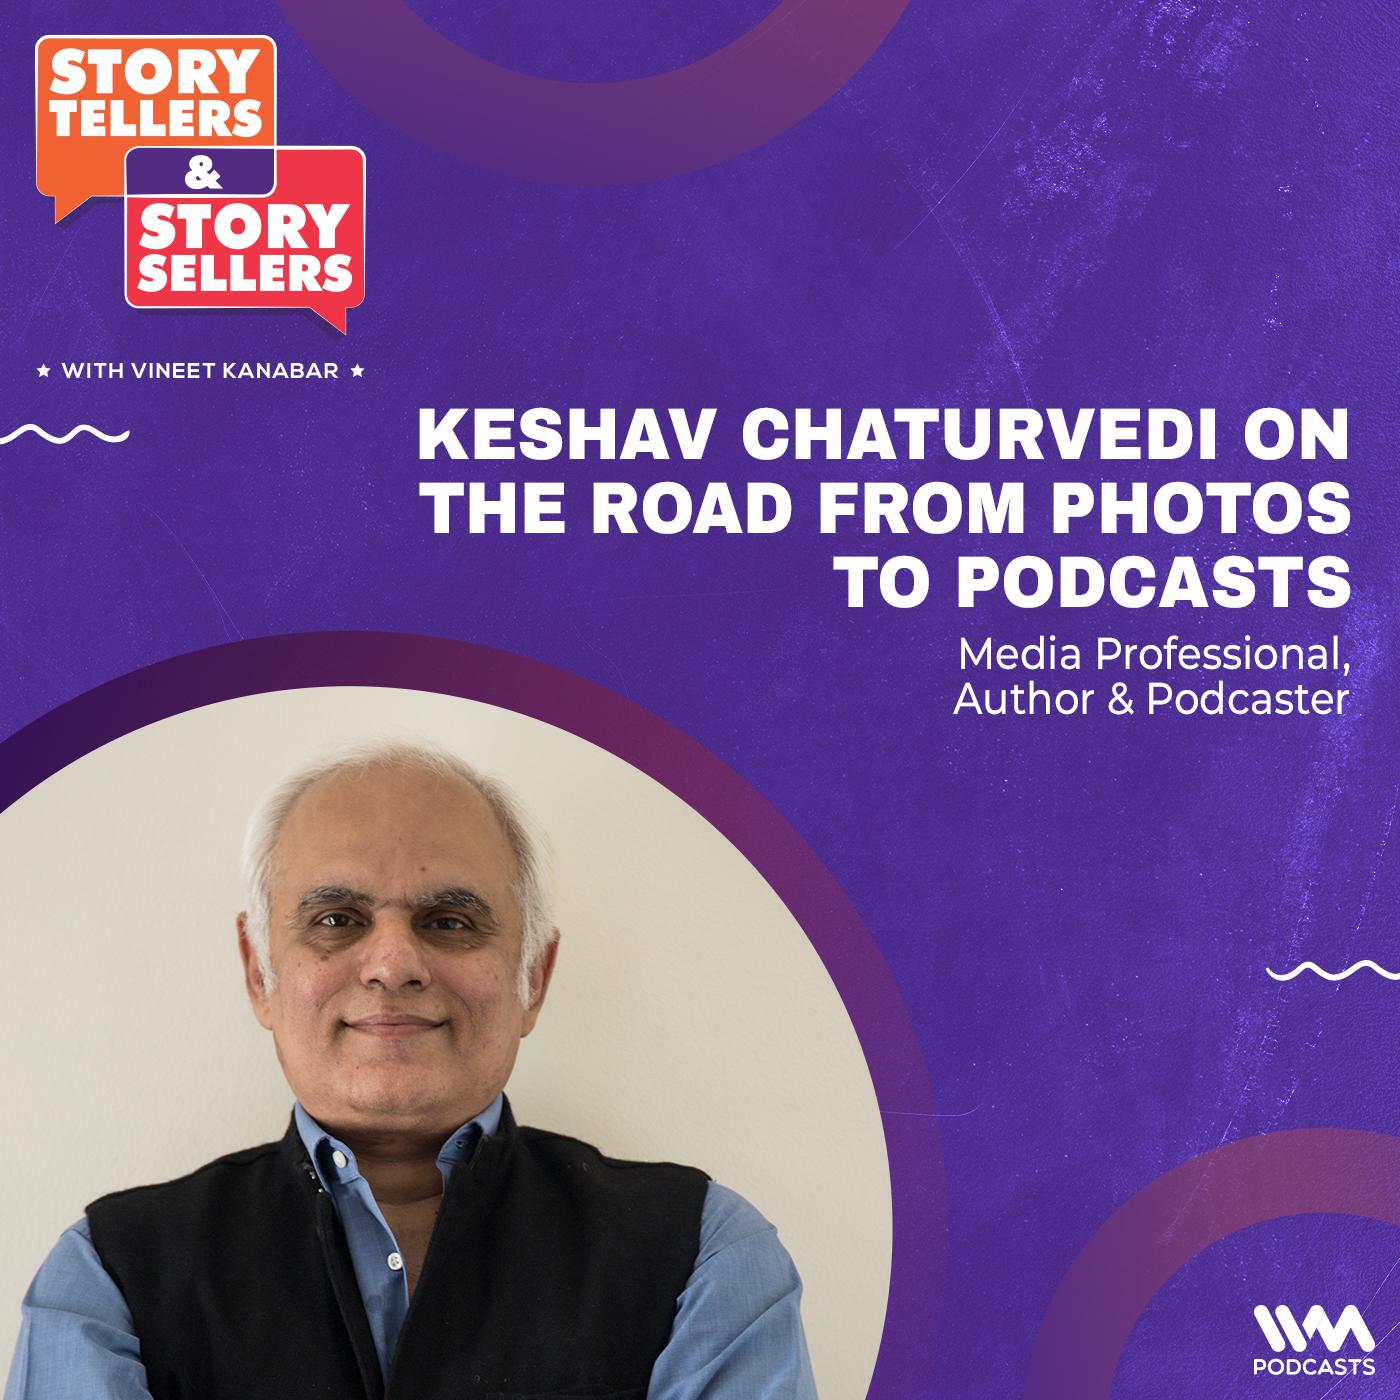 Keshav Chaturvedi on The Road from Photos to Podcasts